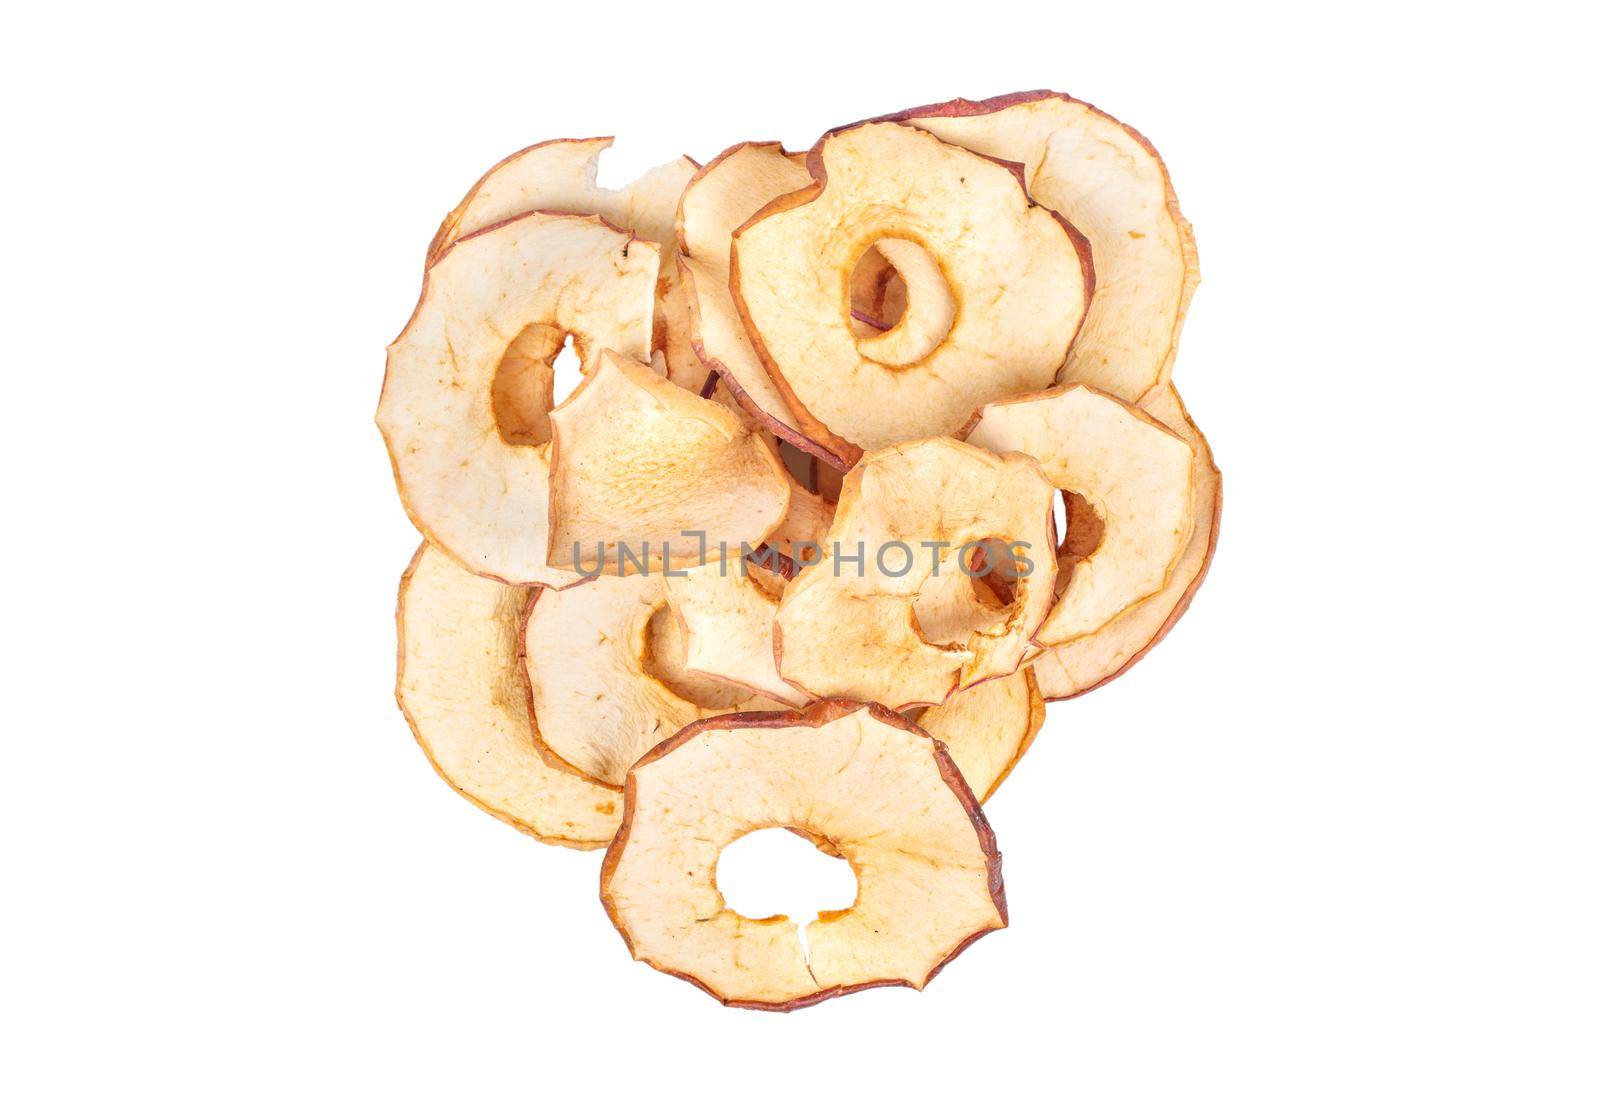 Pile of Apple chips on a white background, top view